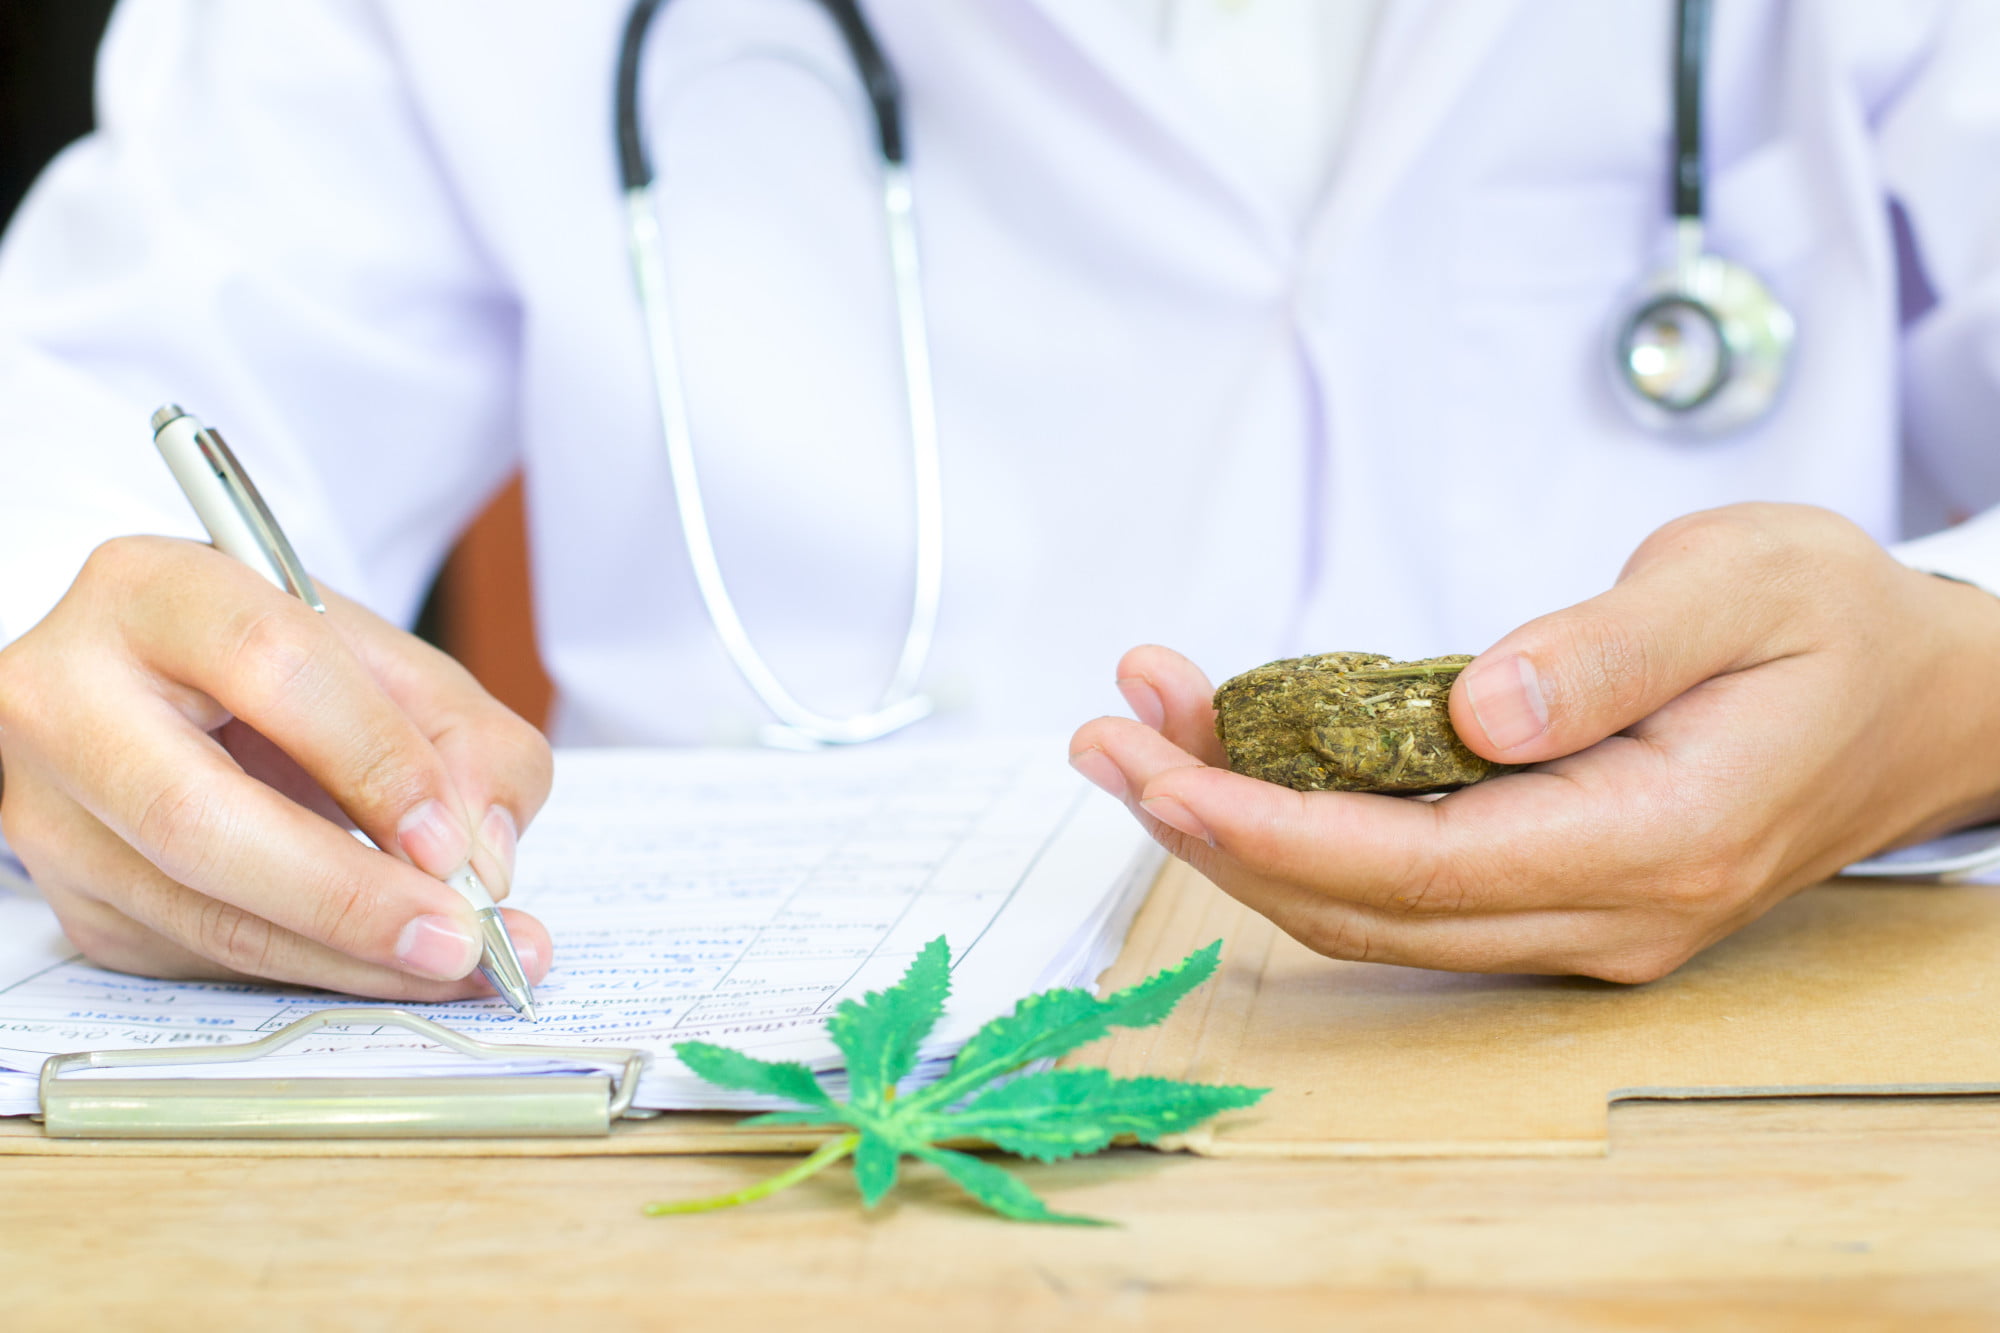 Are you looking for medical cannabis doctors? Here are a few useful tips for making sure you find the best option for you.